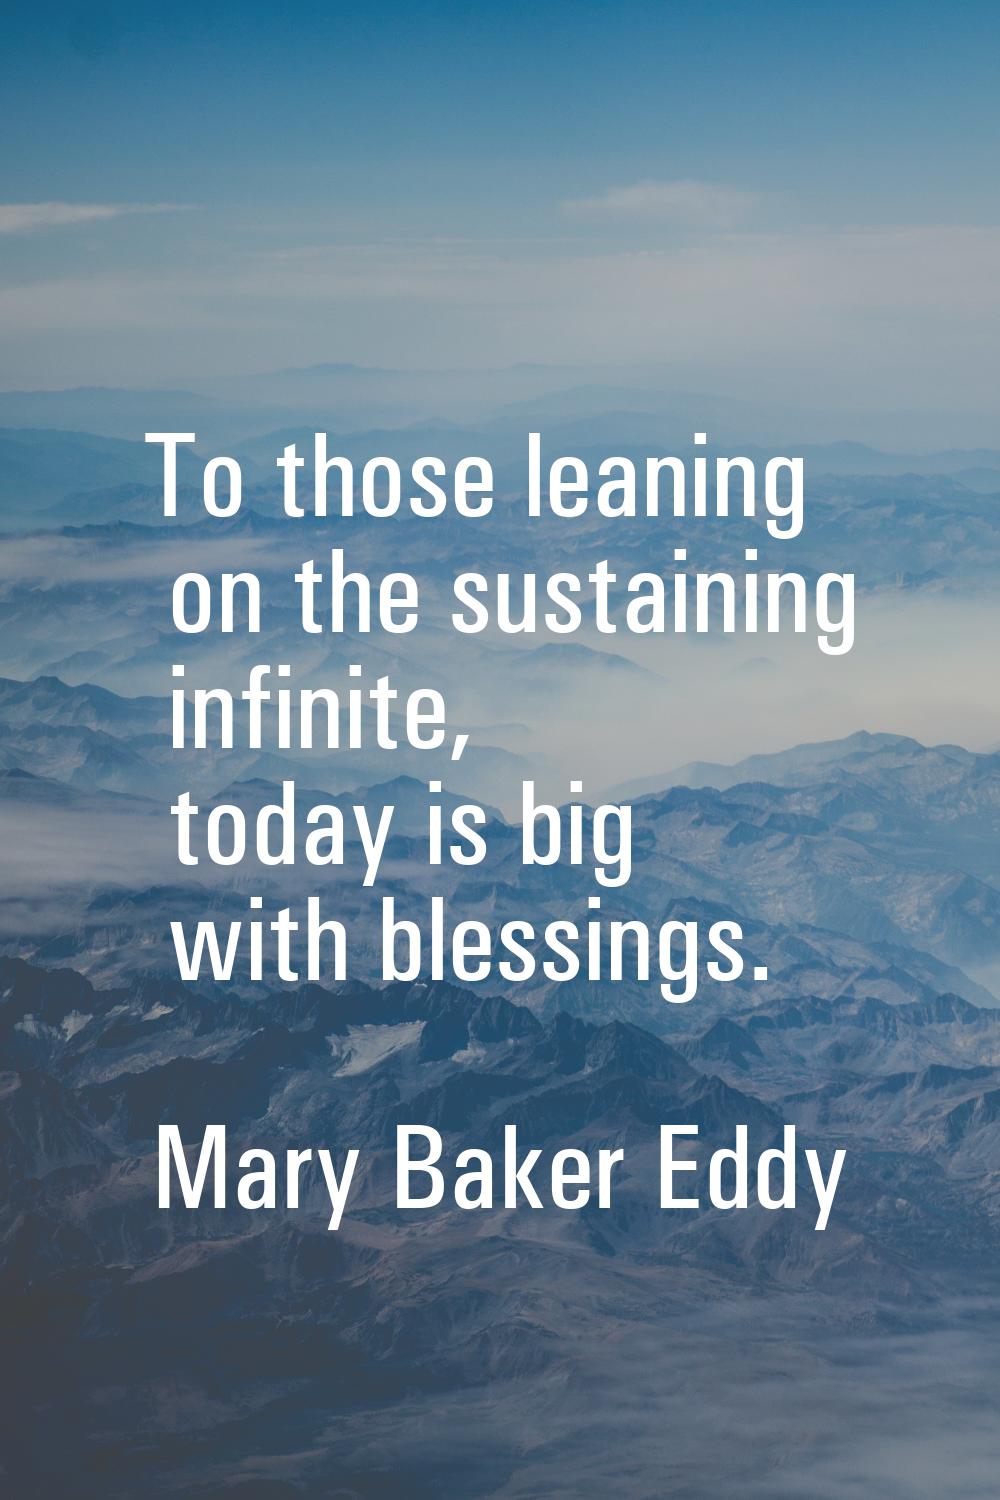 To those leaning on the sustaining infinite, today is big with blessings.